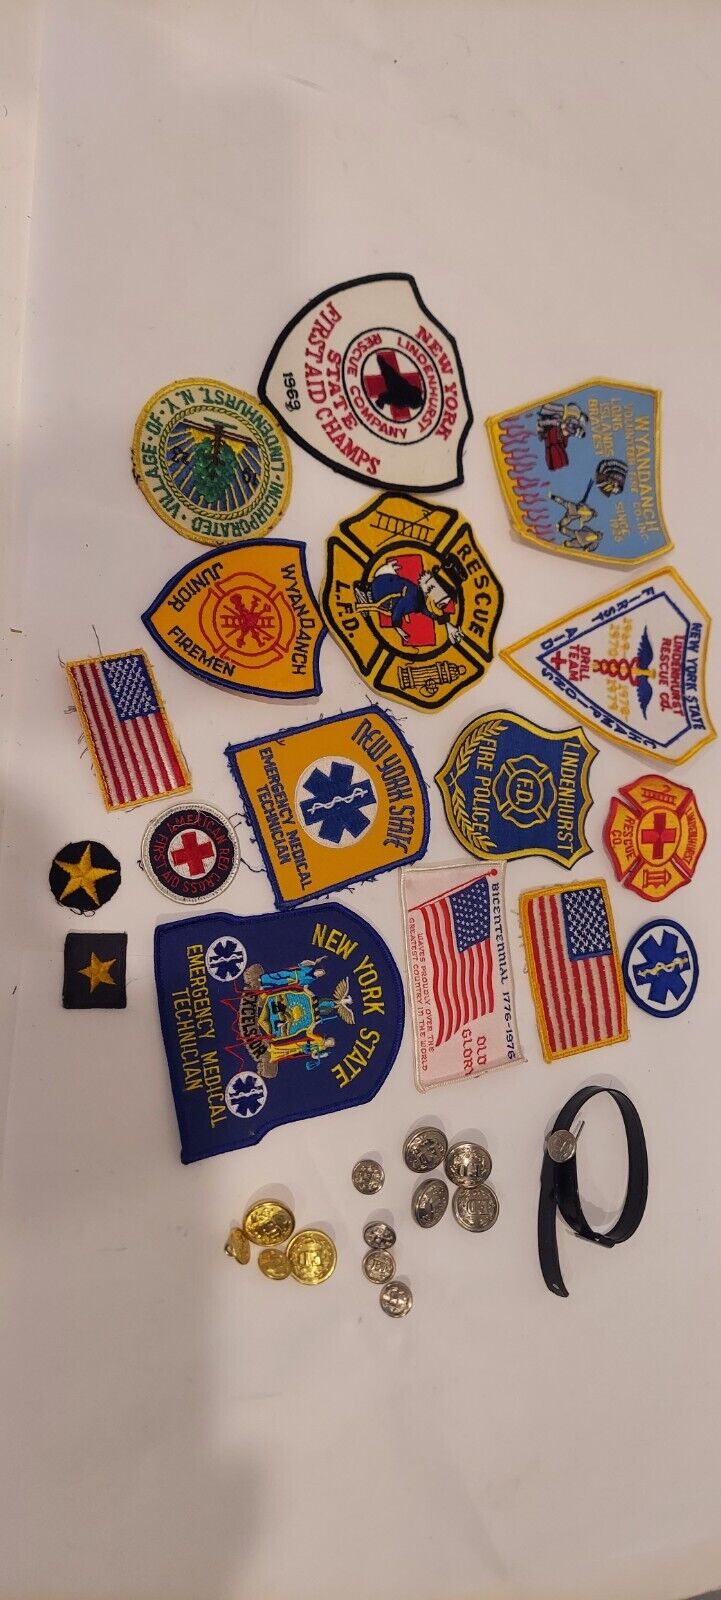 NY Fire Department Rescue Patch Uniform Buttons  Lot Of 30 Vintage Long Island 